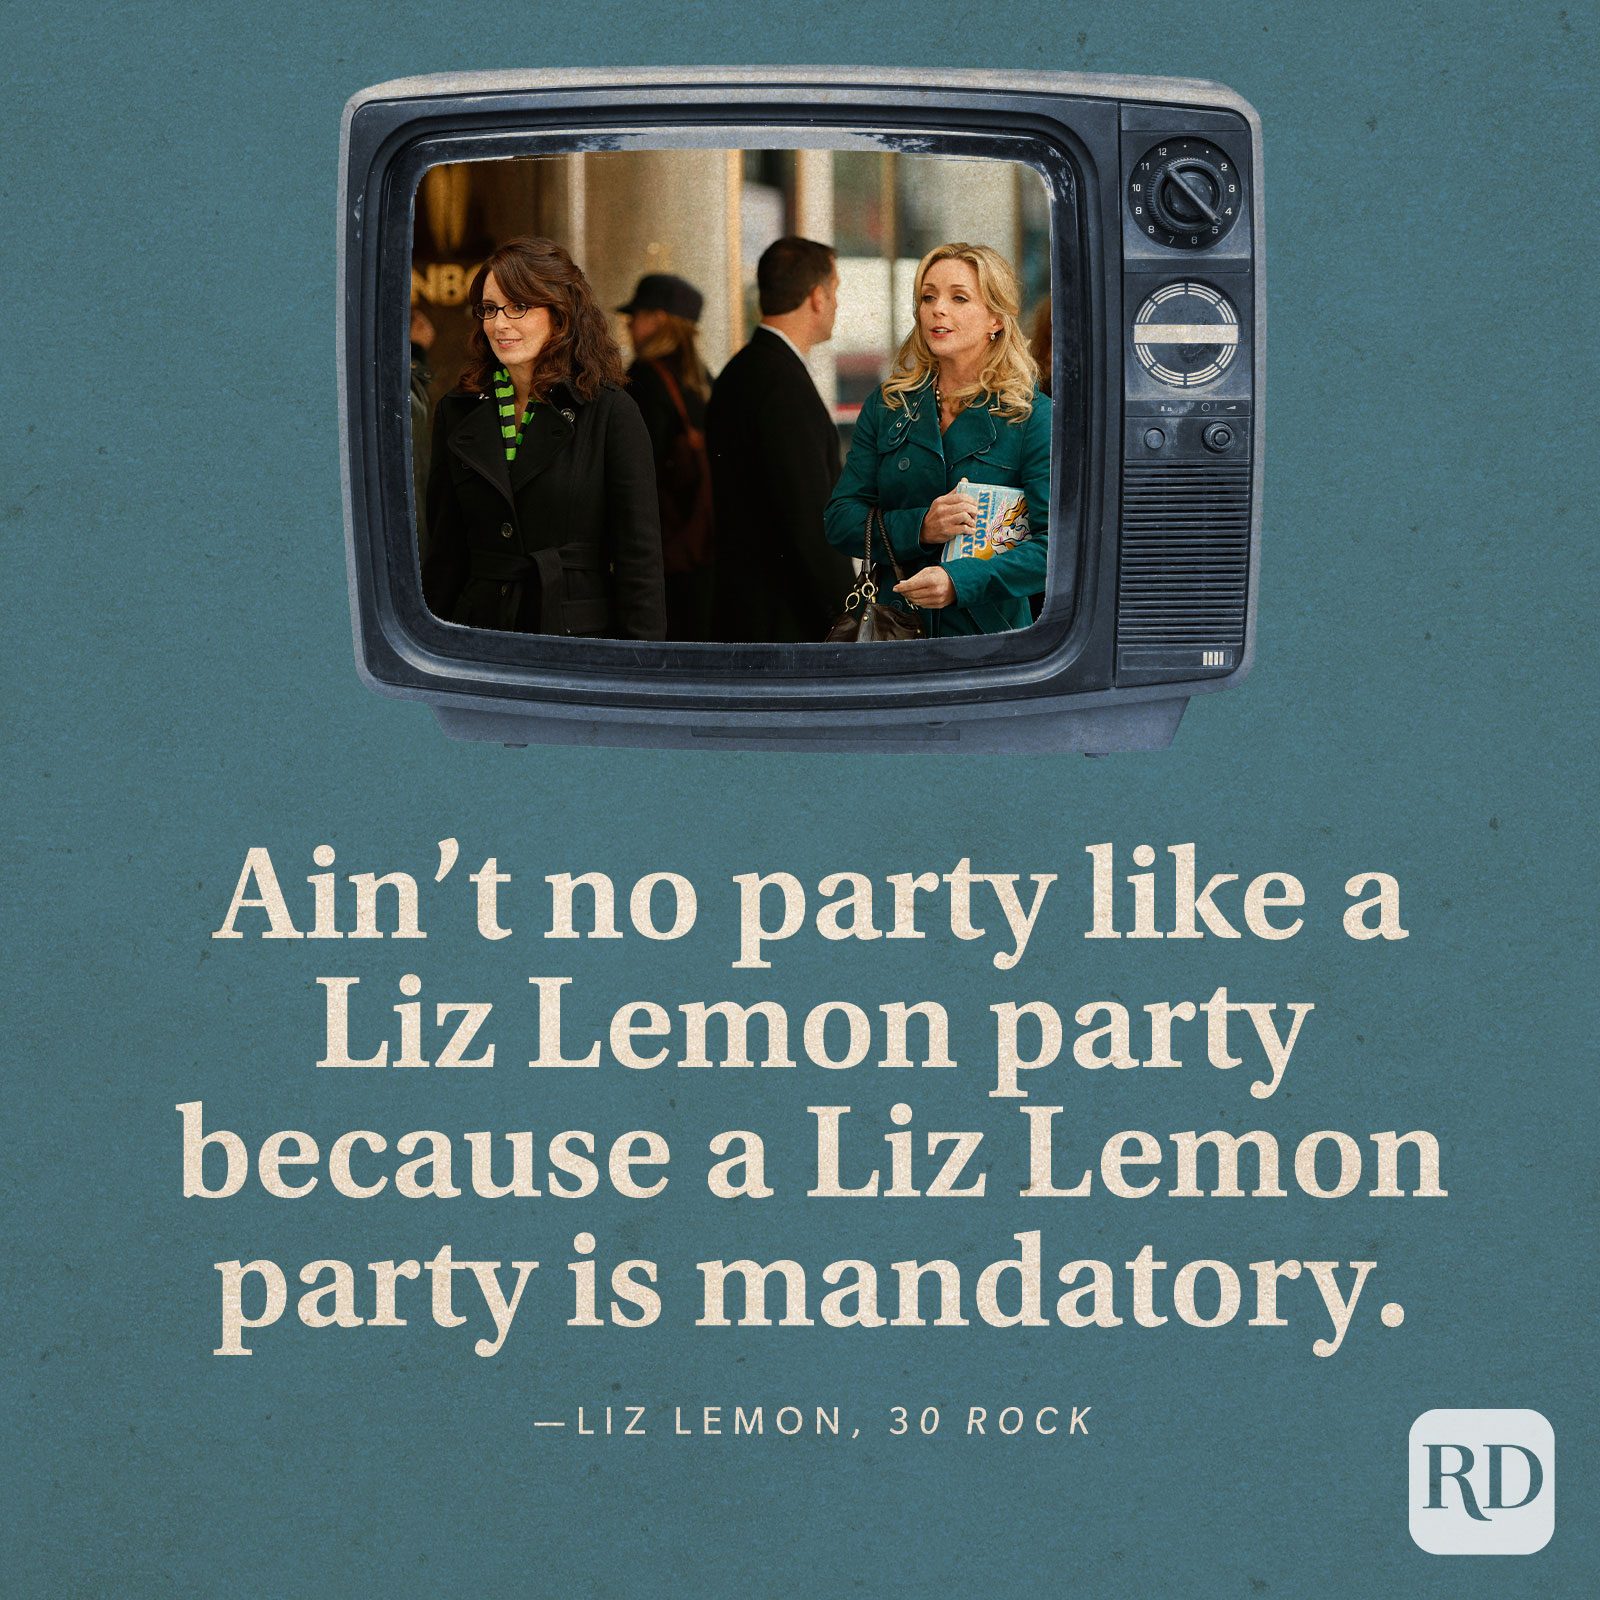  “Ain’t no party like a Liz Lemon party because a Liz Lemon party is mandatory.” -Liz Lemon in 30 Rock.